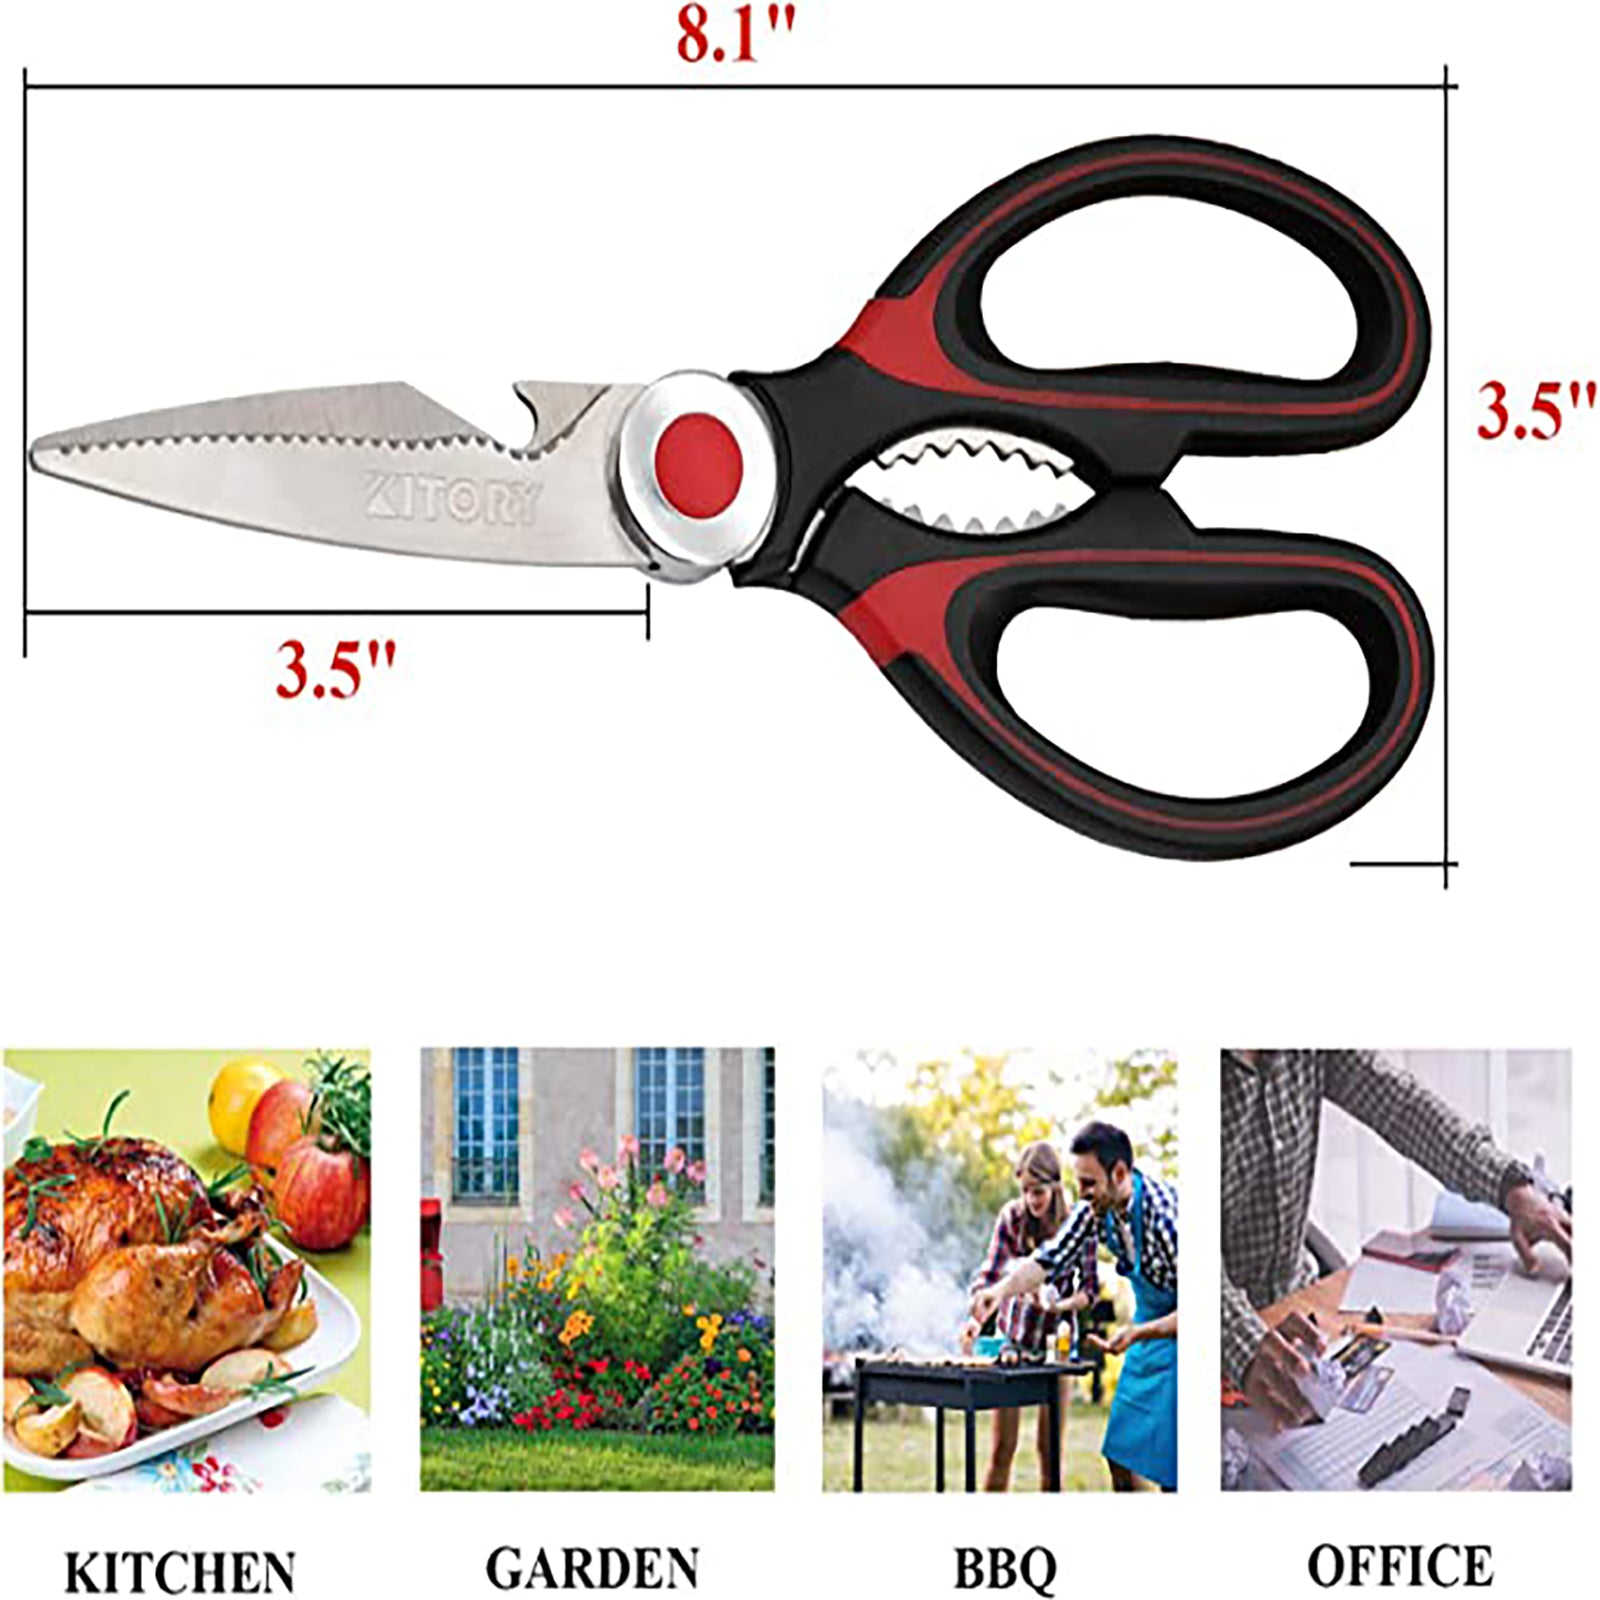 Kitory Kitchen Shears Multi-Purpose Kitchen Scissors Ultra Sharp Heavy Duty Sissors with Sheath for Poultry/Chicken/Fish/Meat/Veggies/Office/BBQ Nut